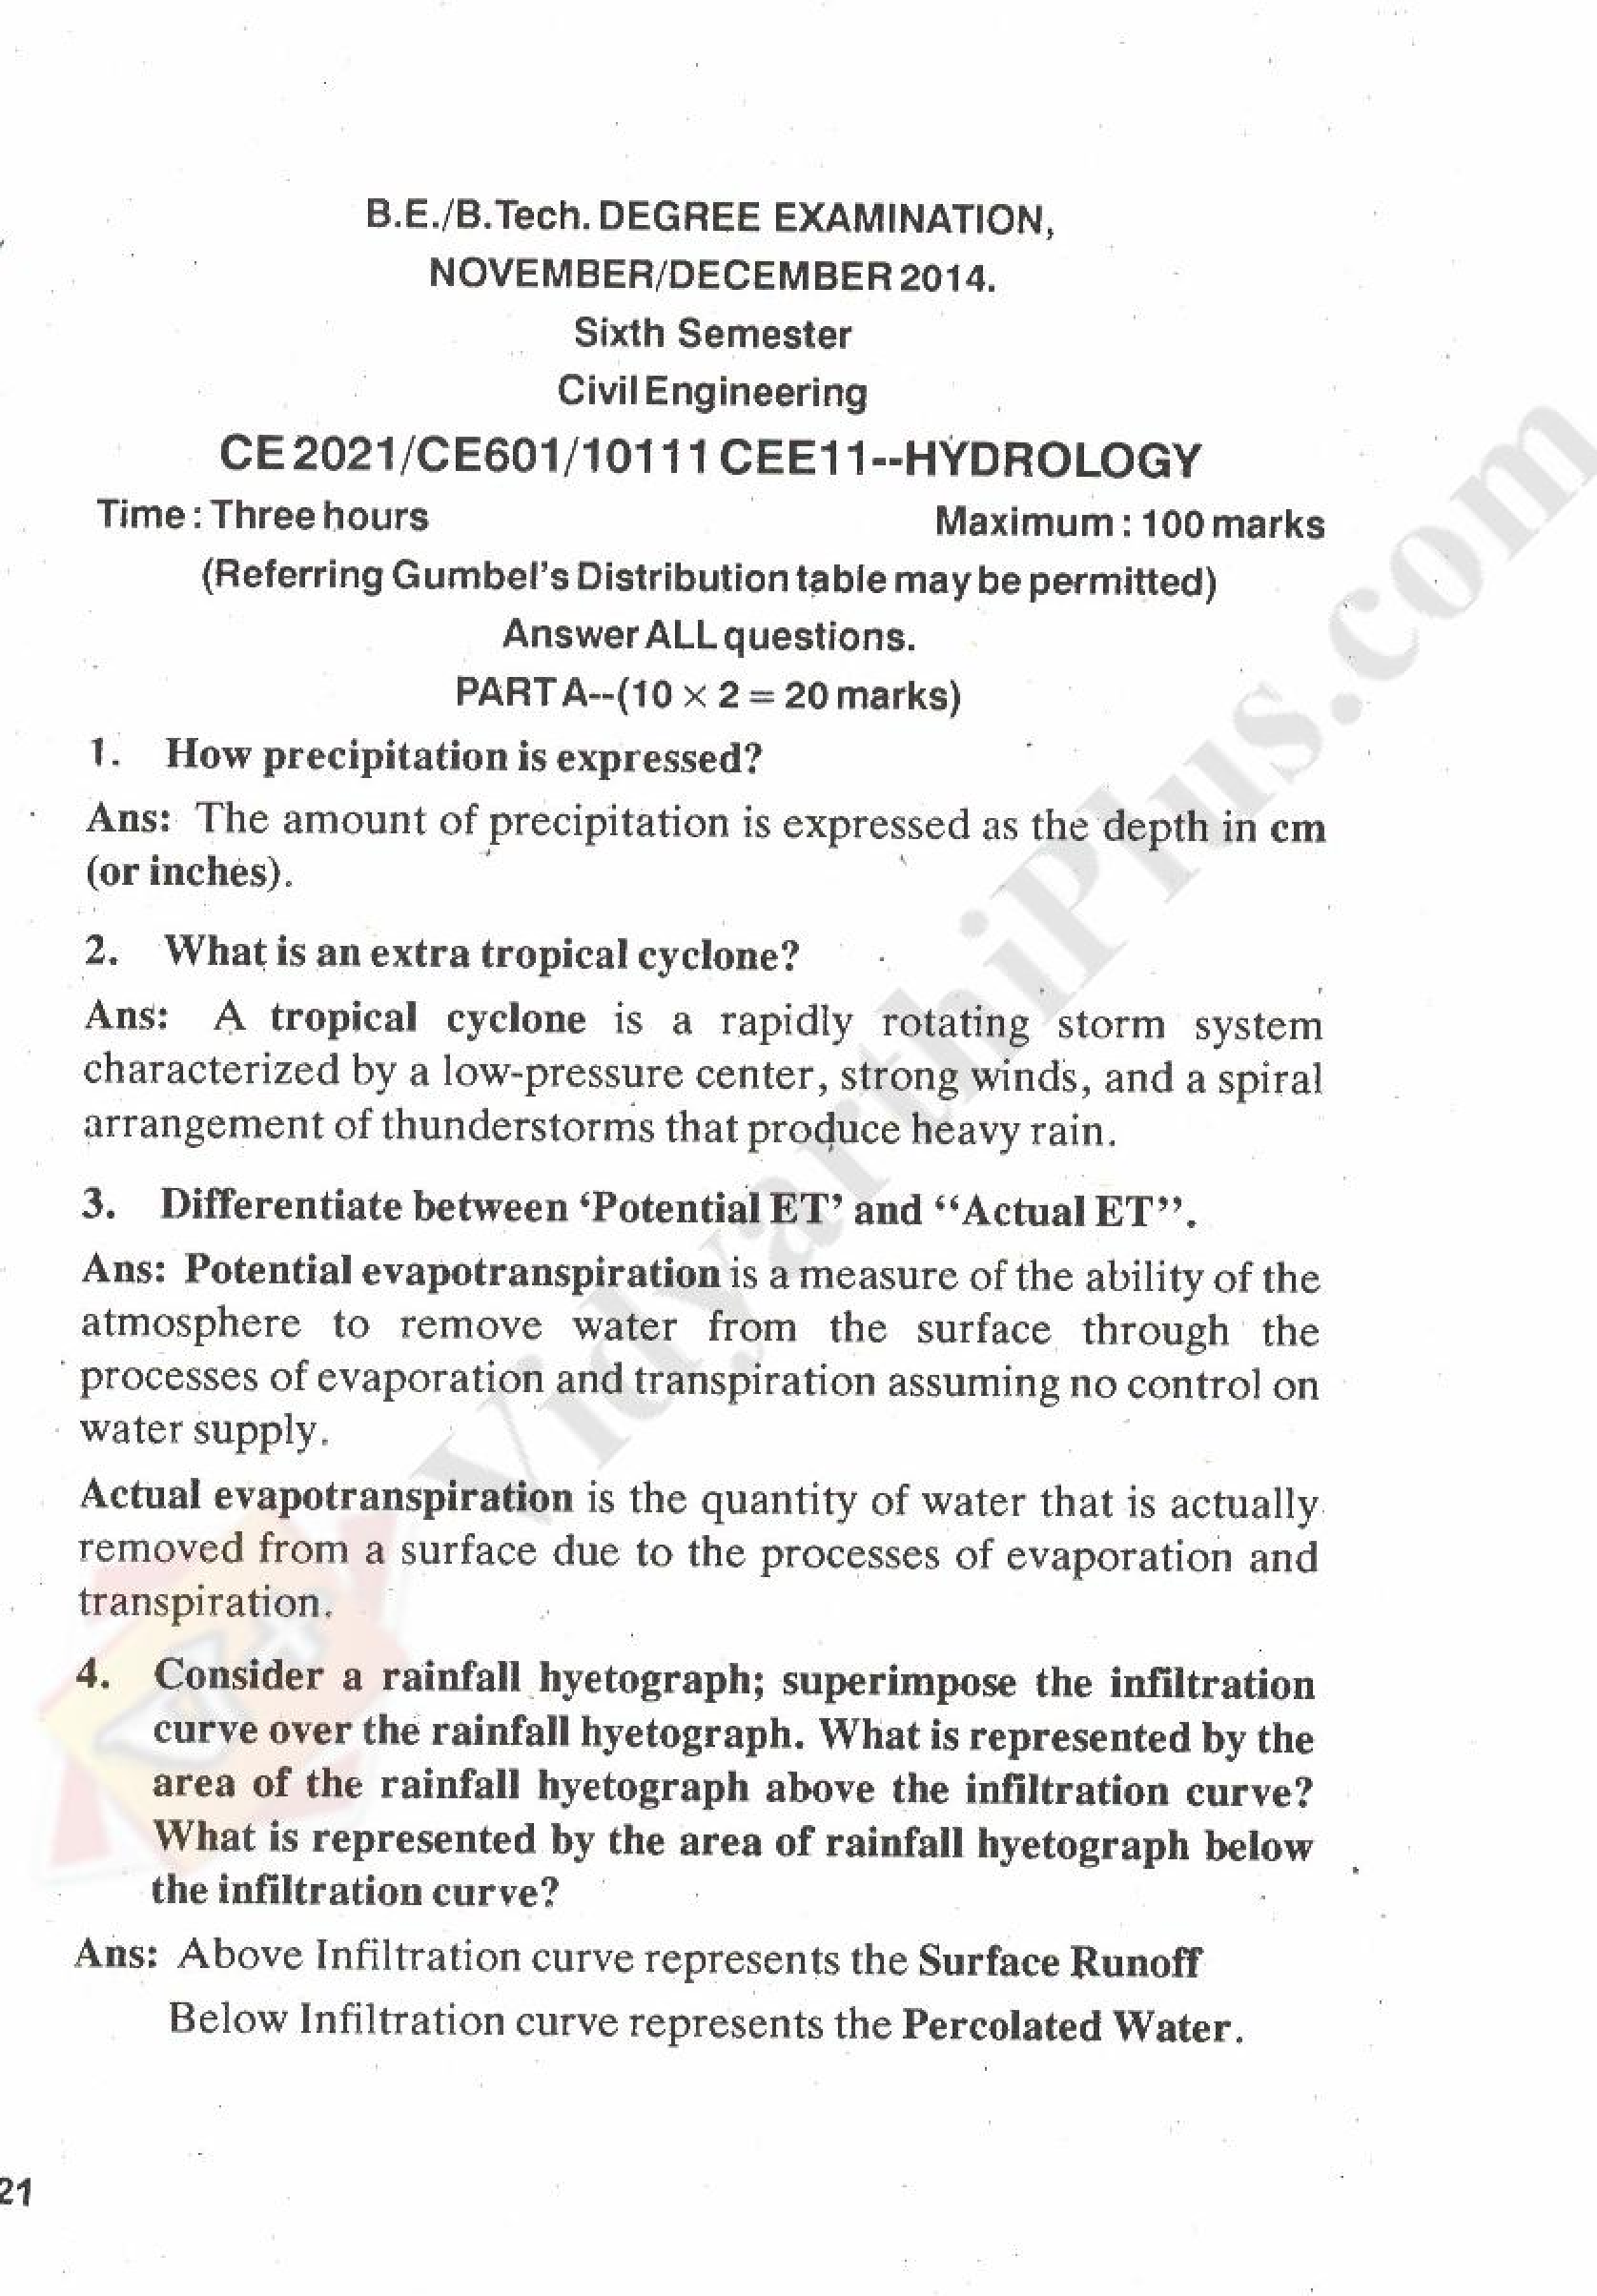 Hydrology Solved Question Papers - 2015 Edition